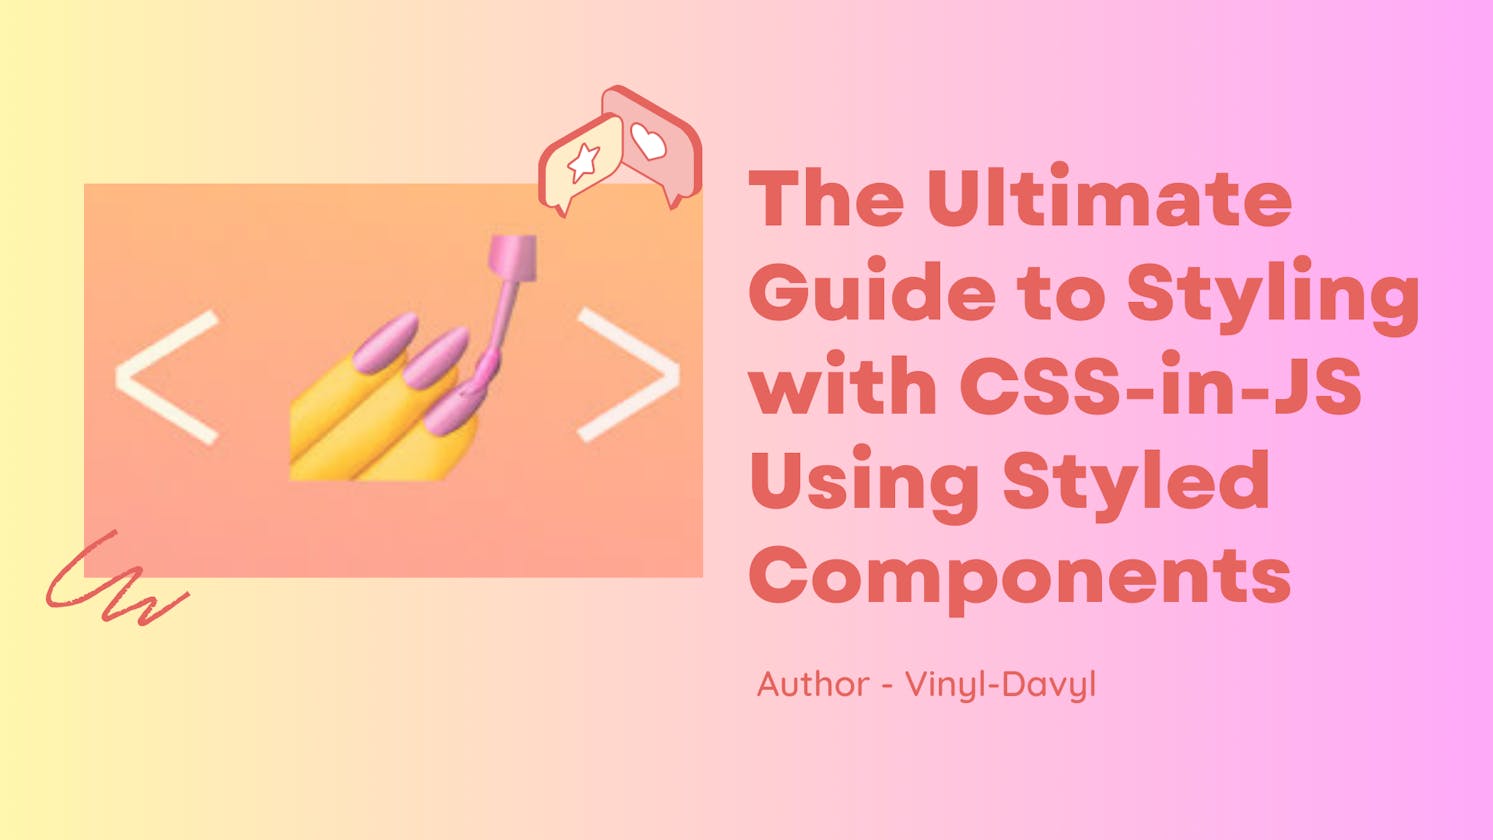 The Ultimate Guide to Styling with CSS-in-JS Using Styled Components